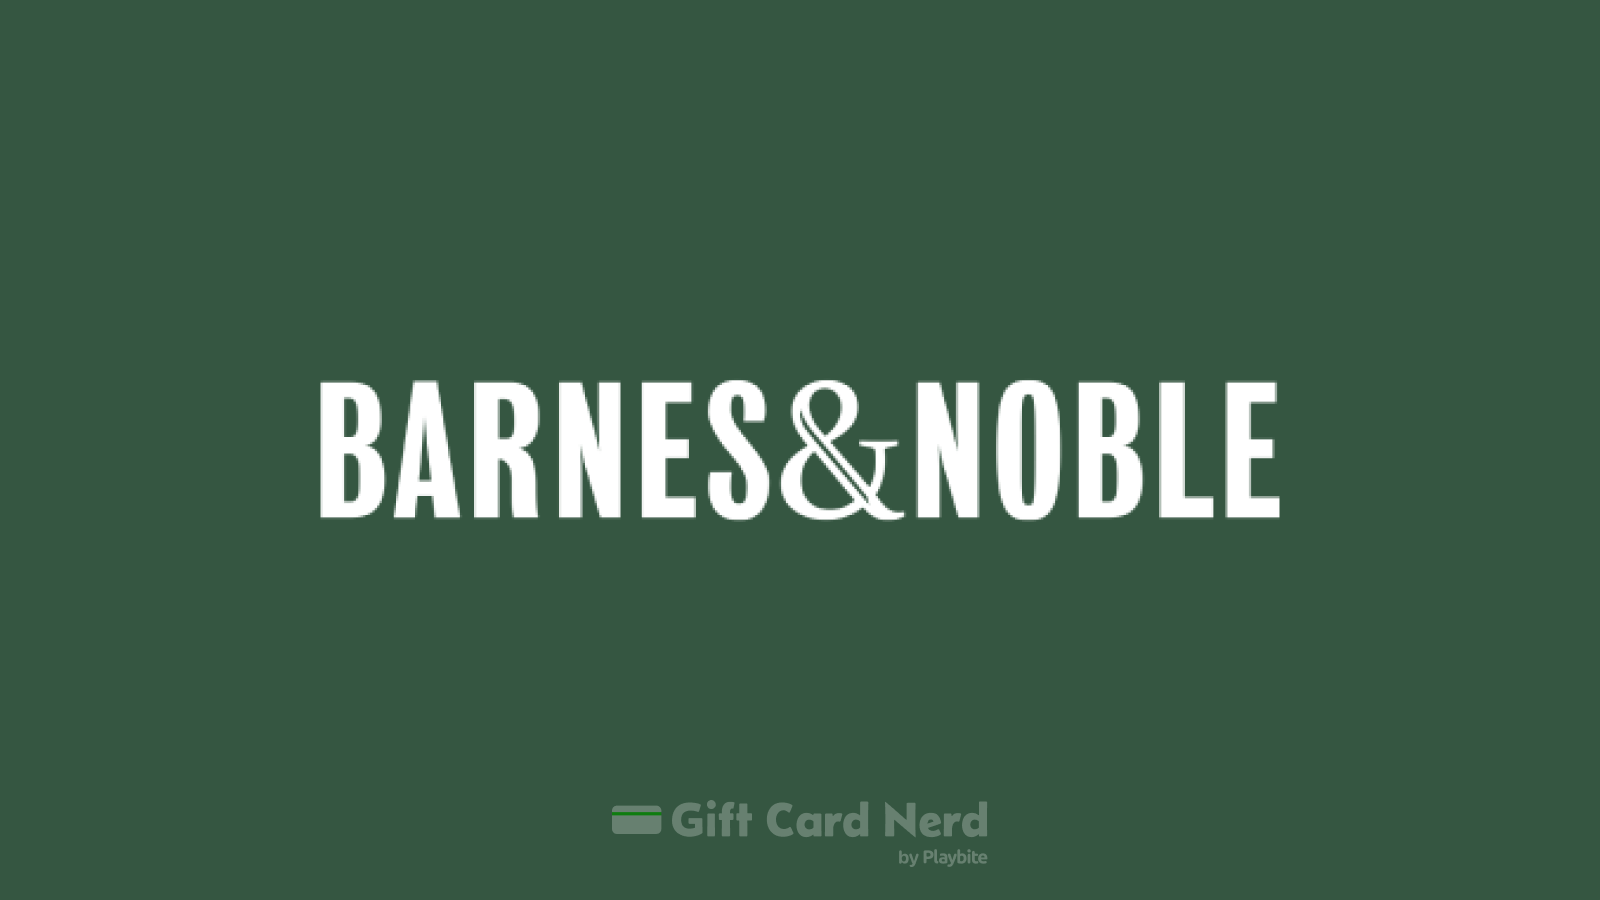 How to Check Your Barnes and Noble Gift Card Balance